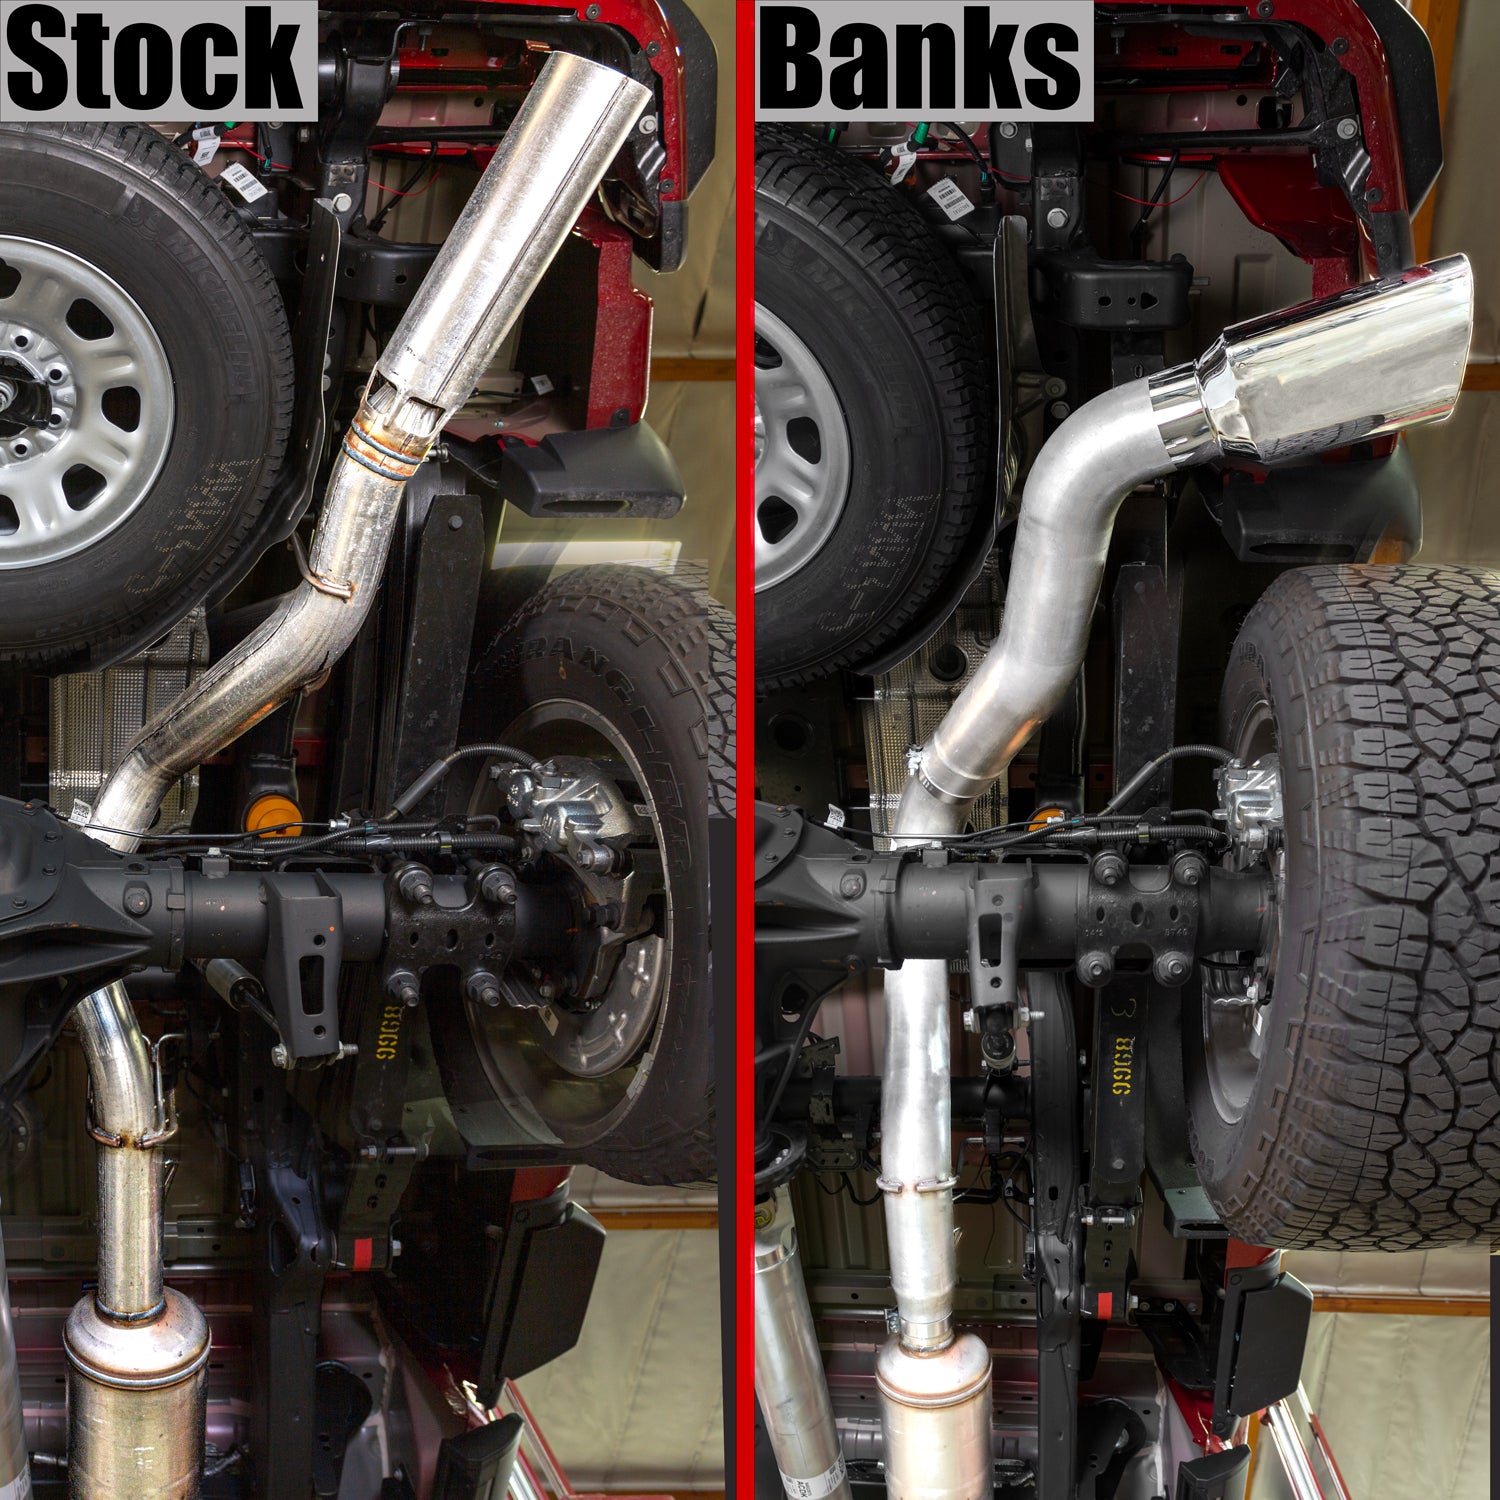 Underbody comparison between the factory L5P Exhaust and the Banks 5in Monster Exhaust